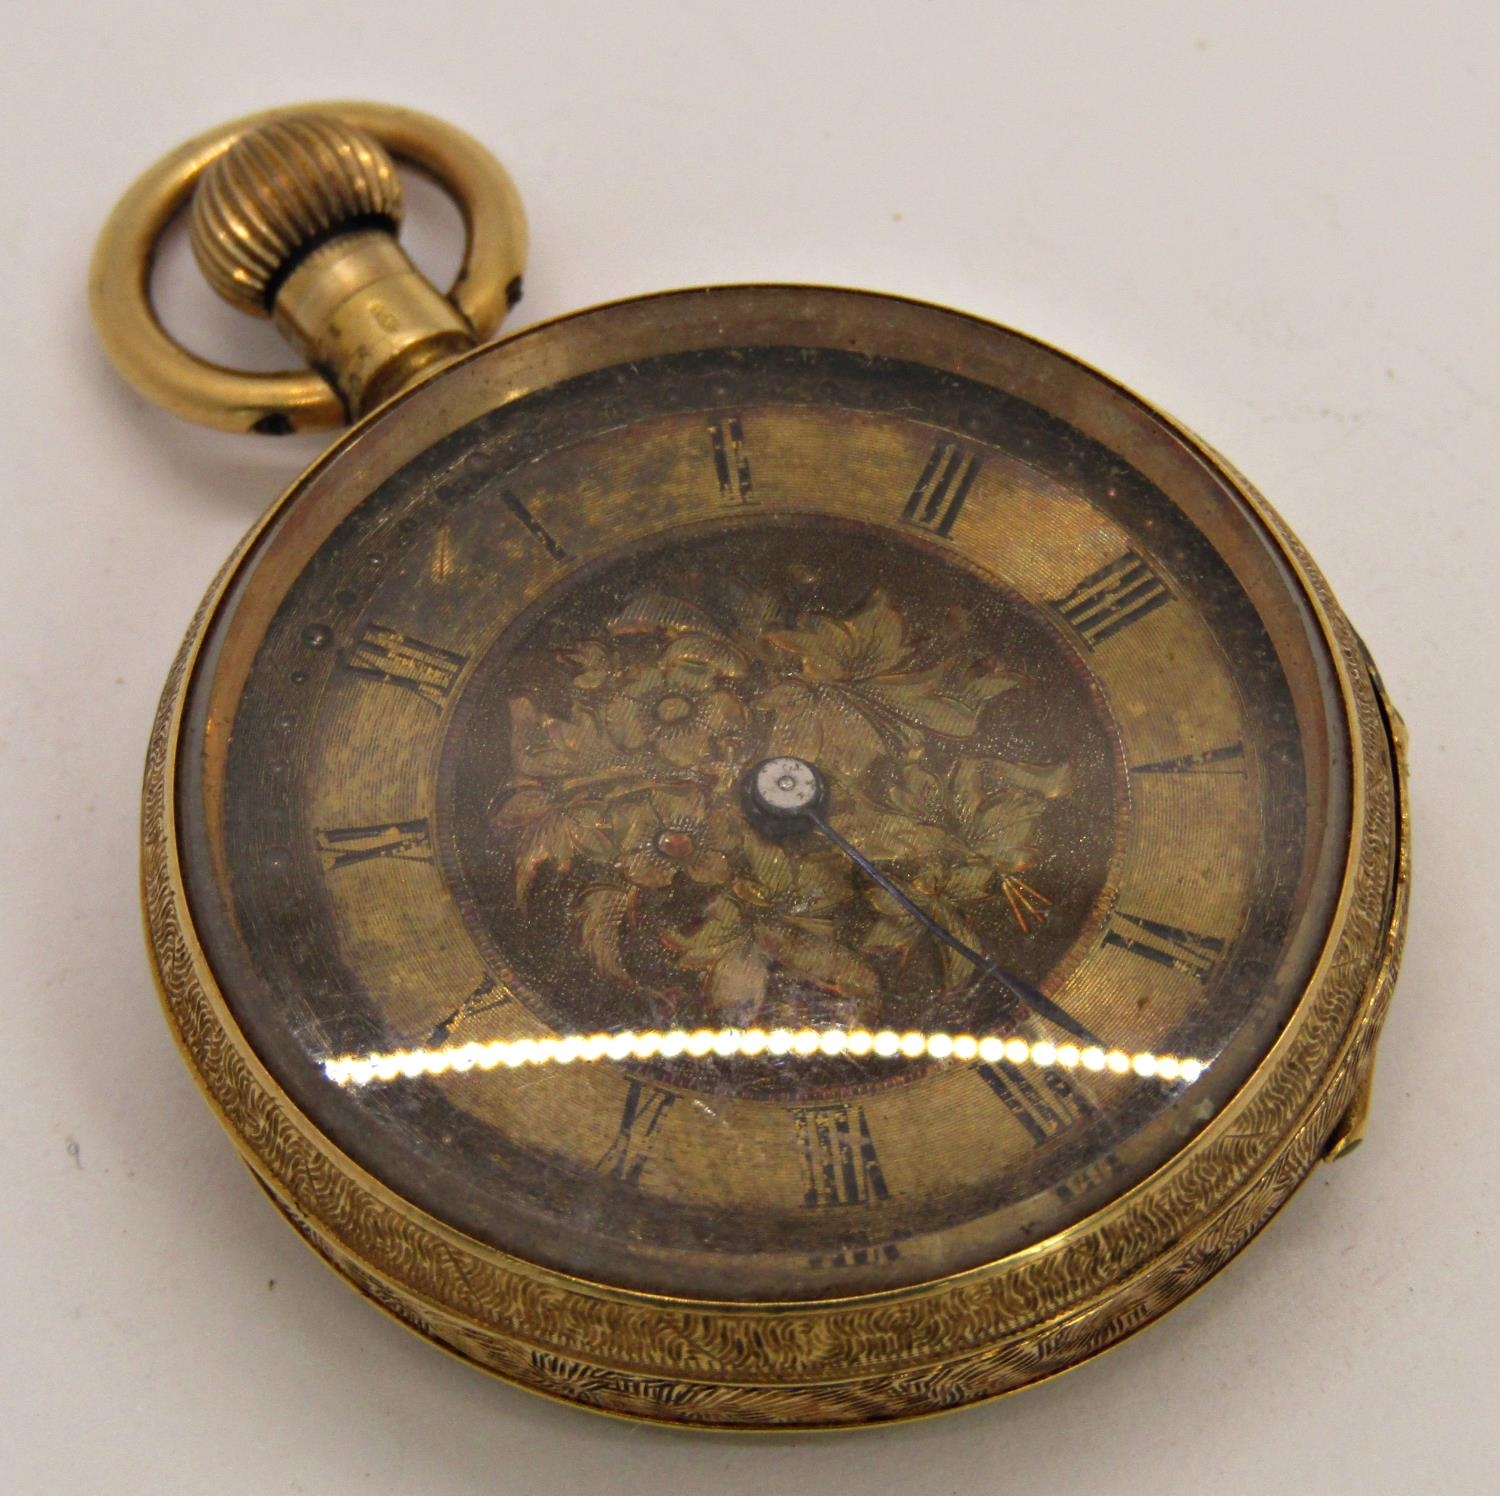 A 19th century continental fob watch with 18k engraved casework and chased dial